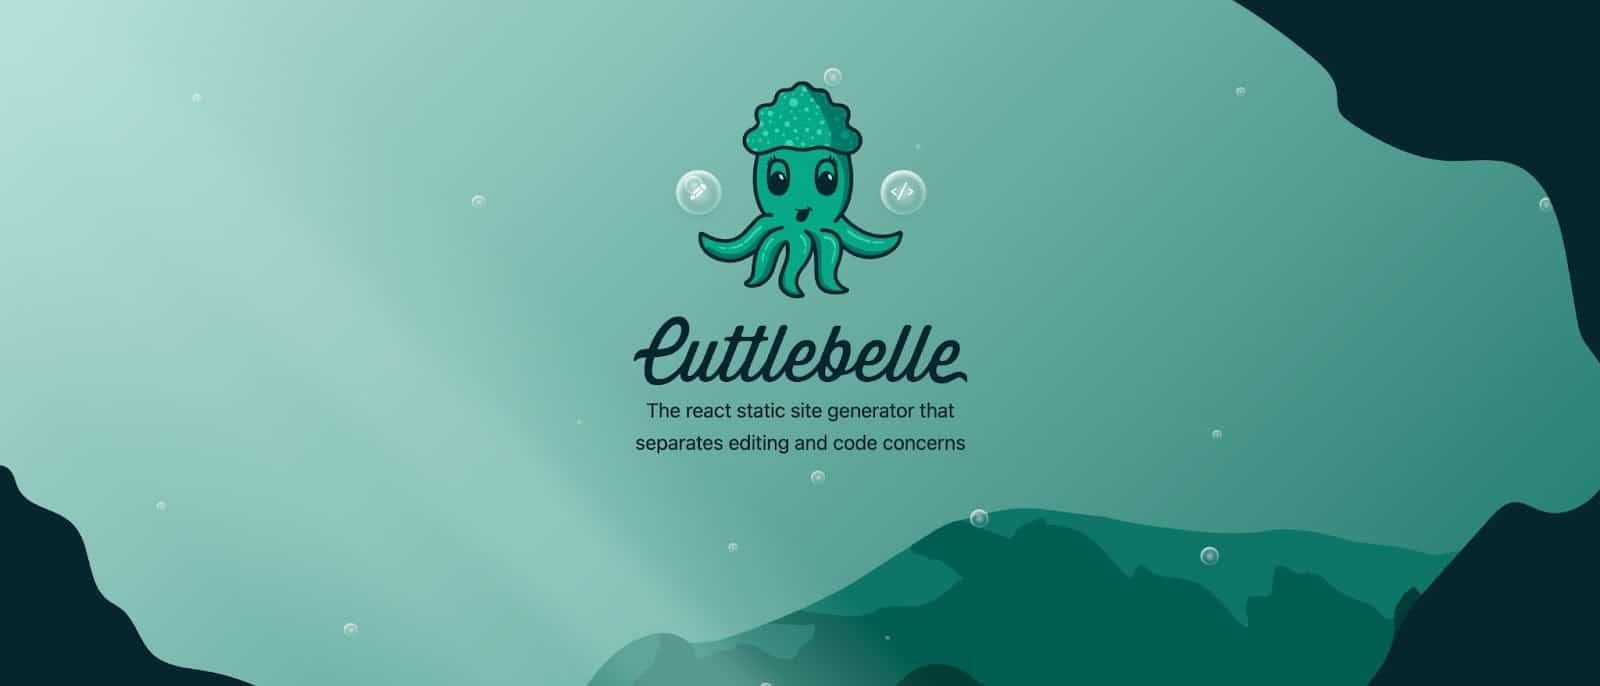 The Cuttlebelle website homepage